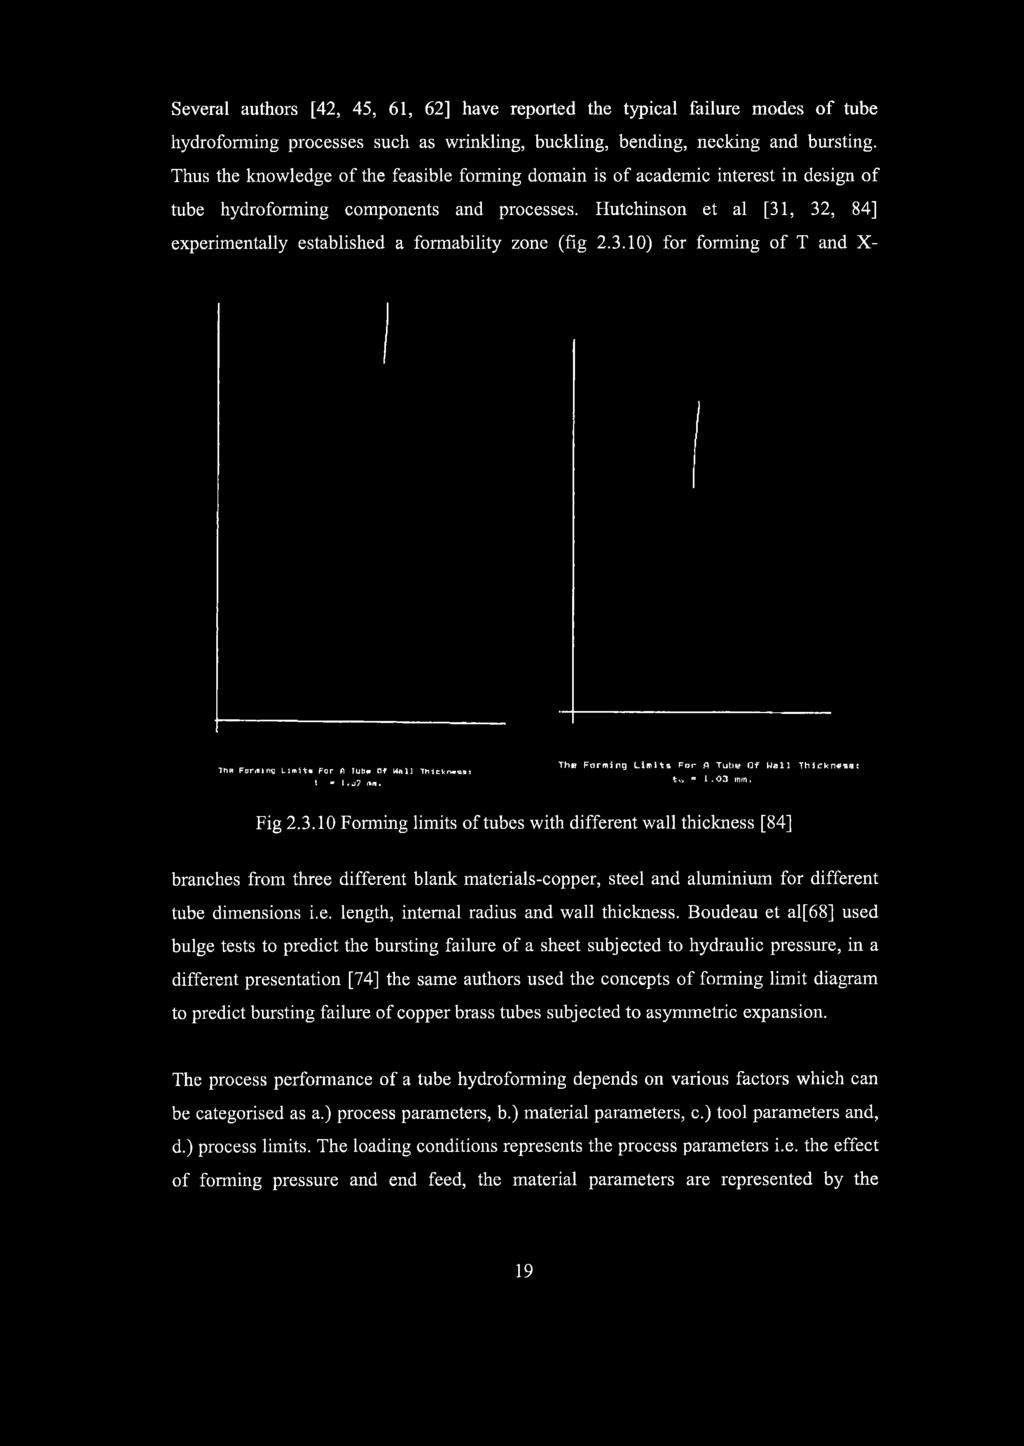 Hutchinson et al [31, 32, 84] experimentally established a formability zone (fig 2.3.10) for forming of T and X- ThH Forcing L im it* For A Tub» Of W«U Ttiieknwsai I * l«j? mn.